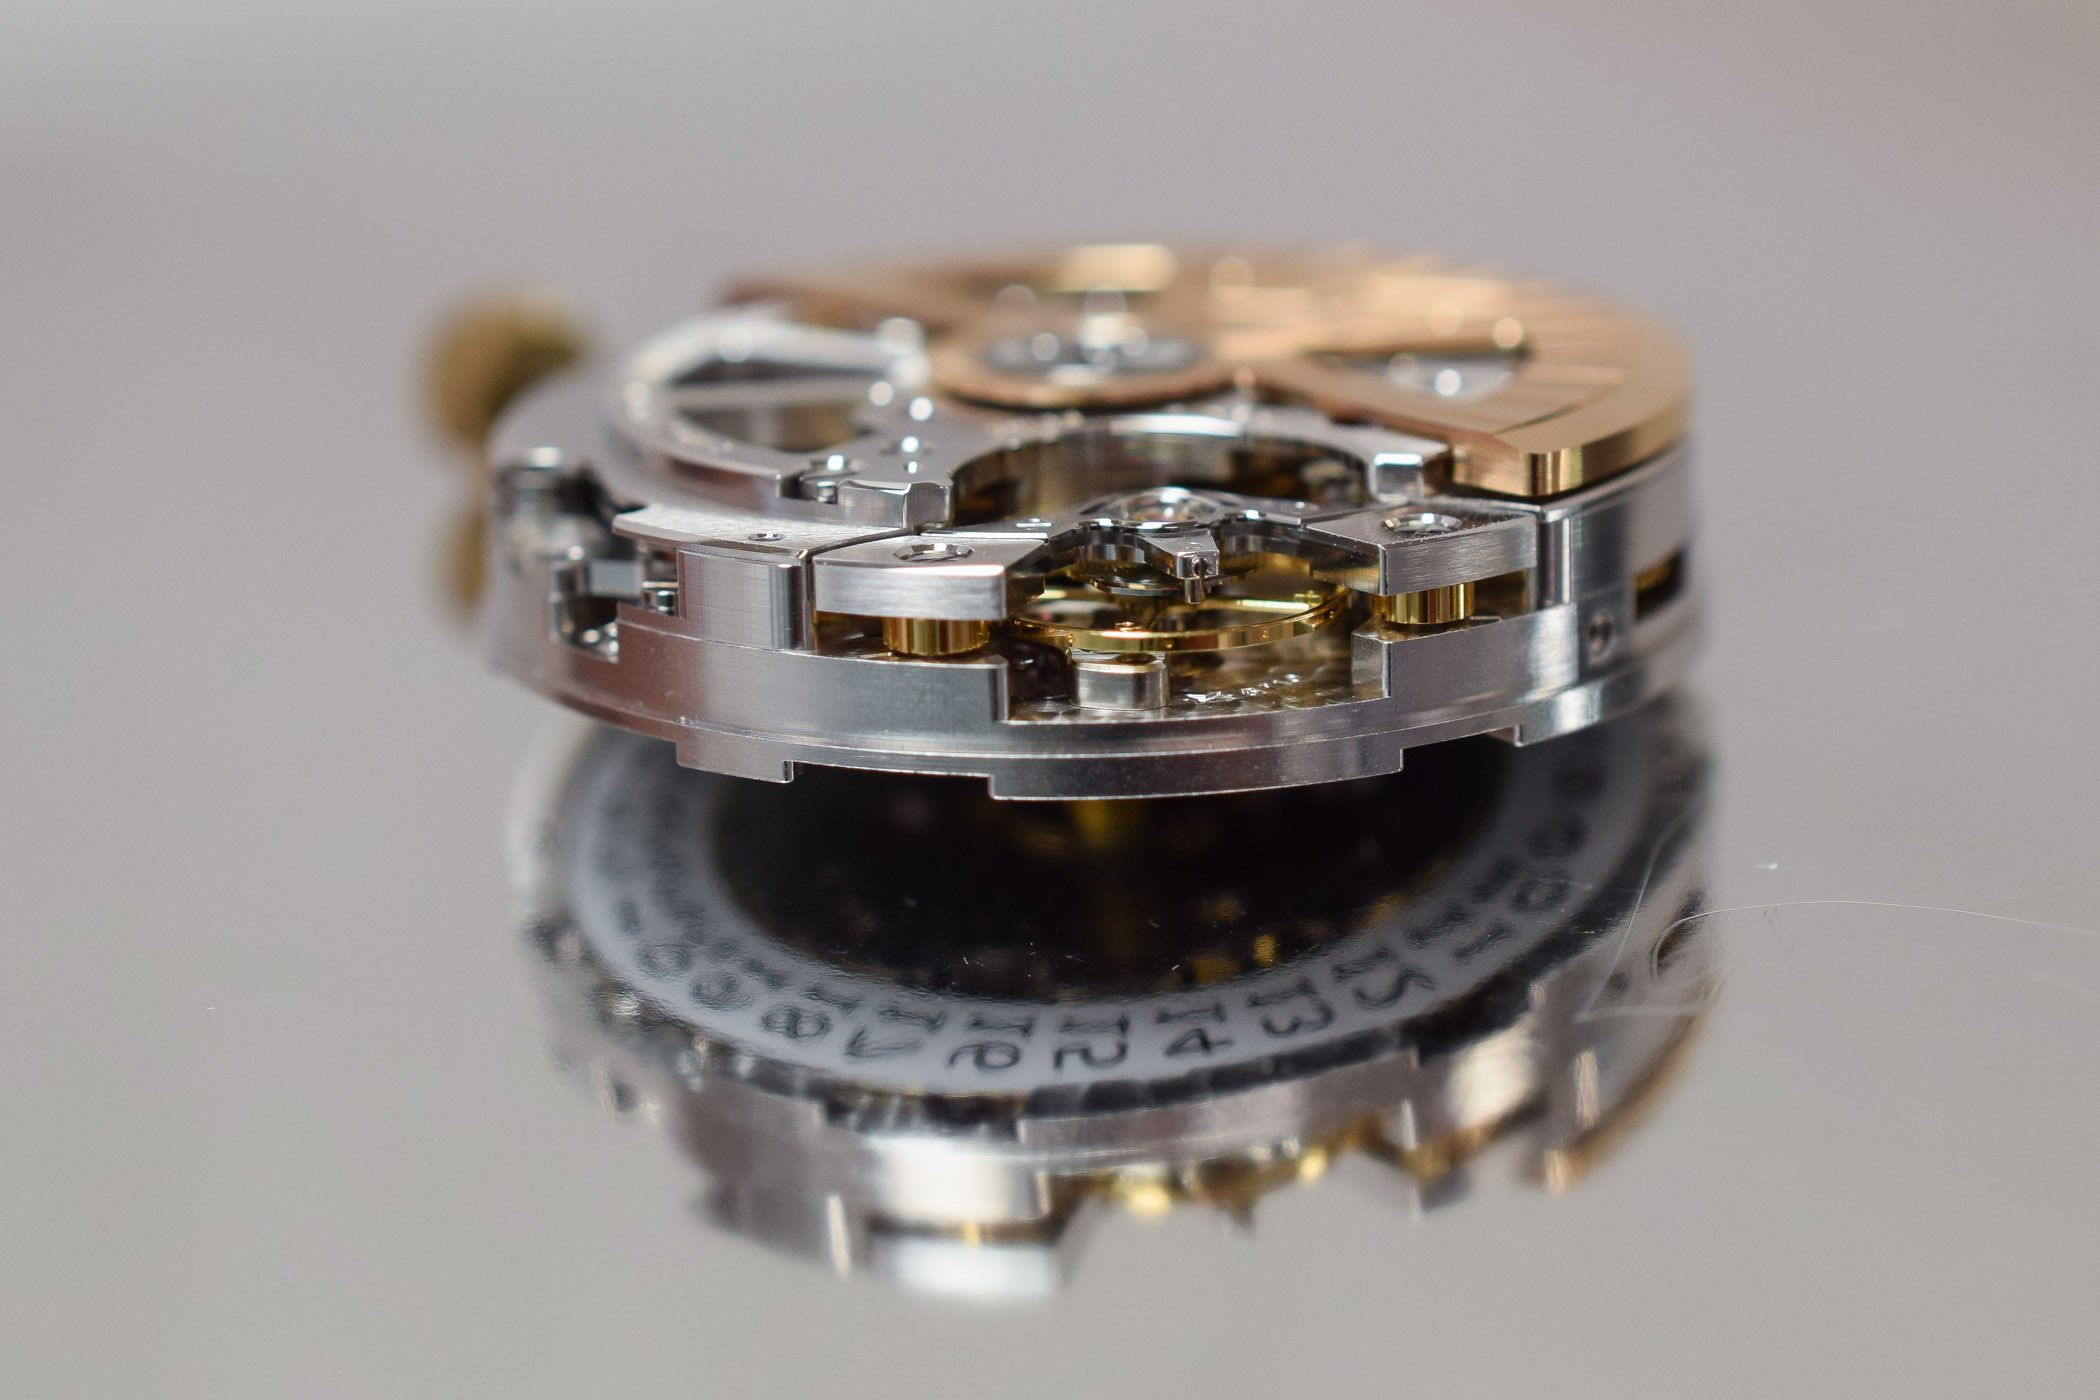 Vaucher integrated high-frequency chronograph Calibre Seed VMF 6710 - 3